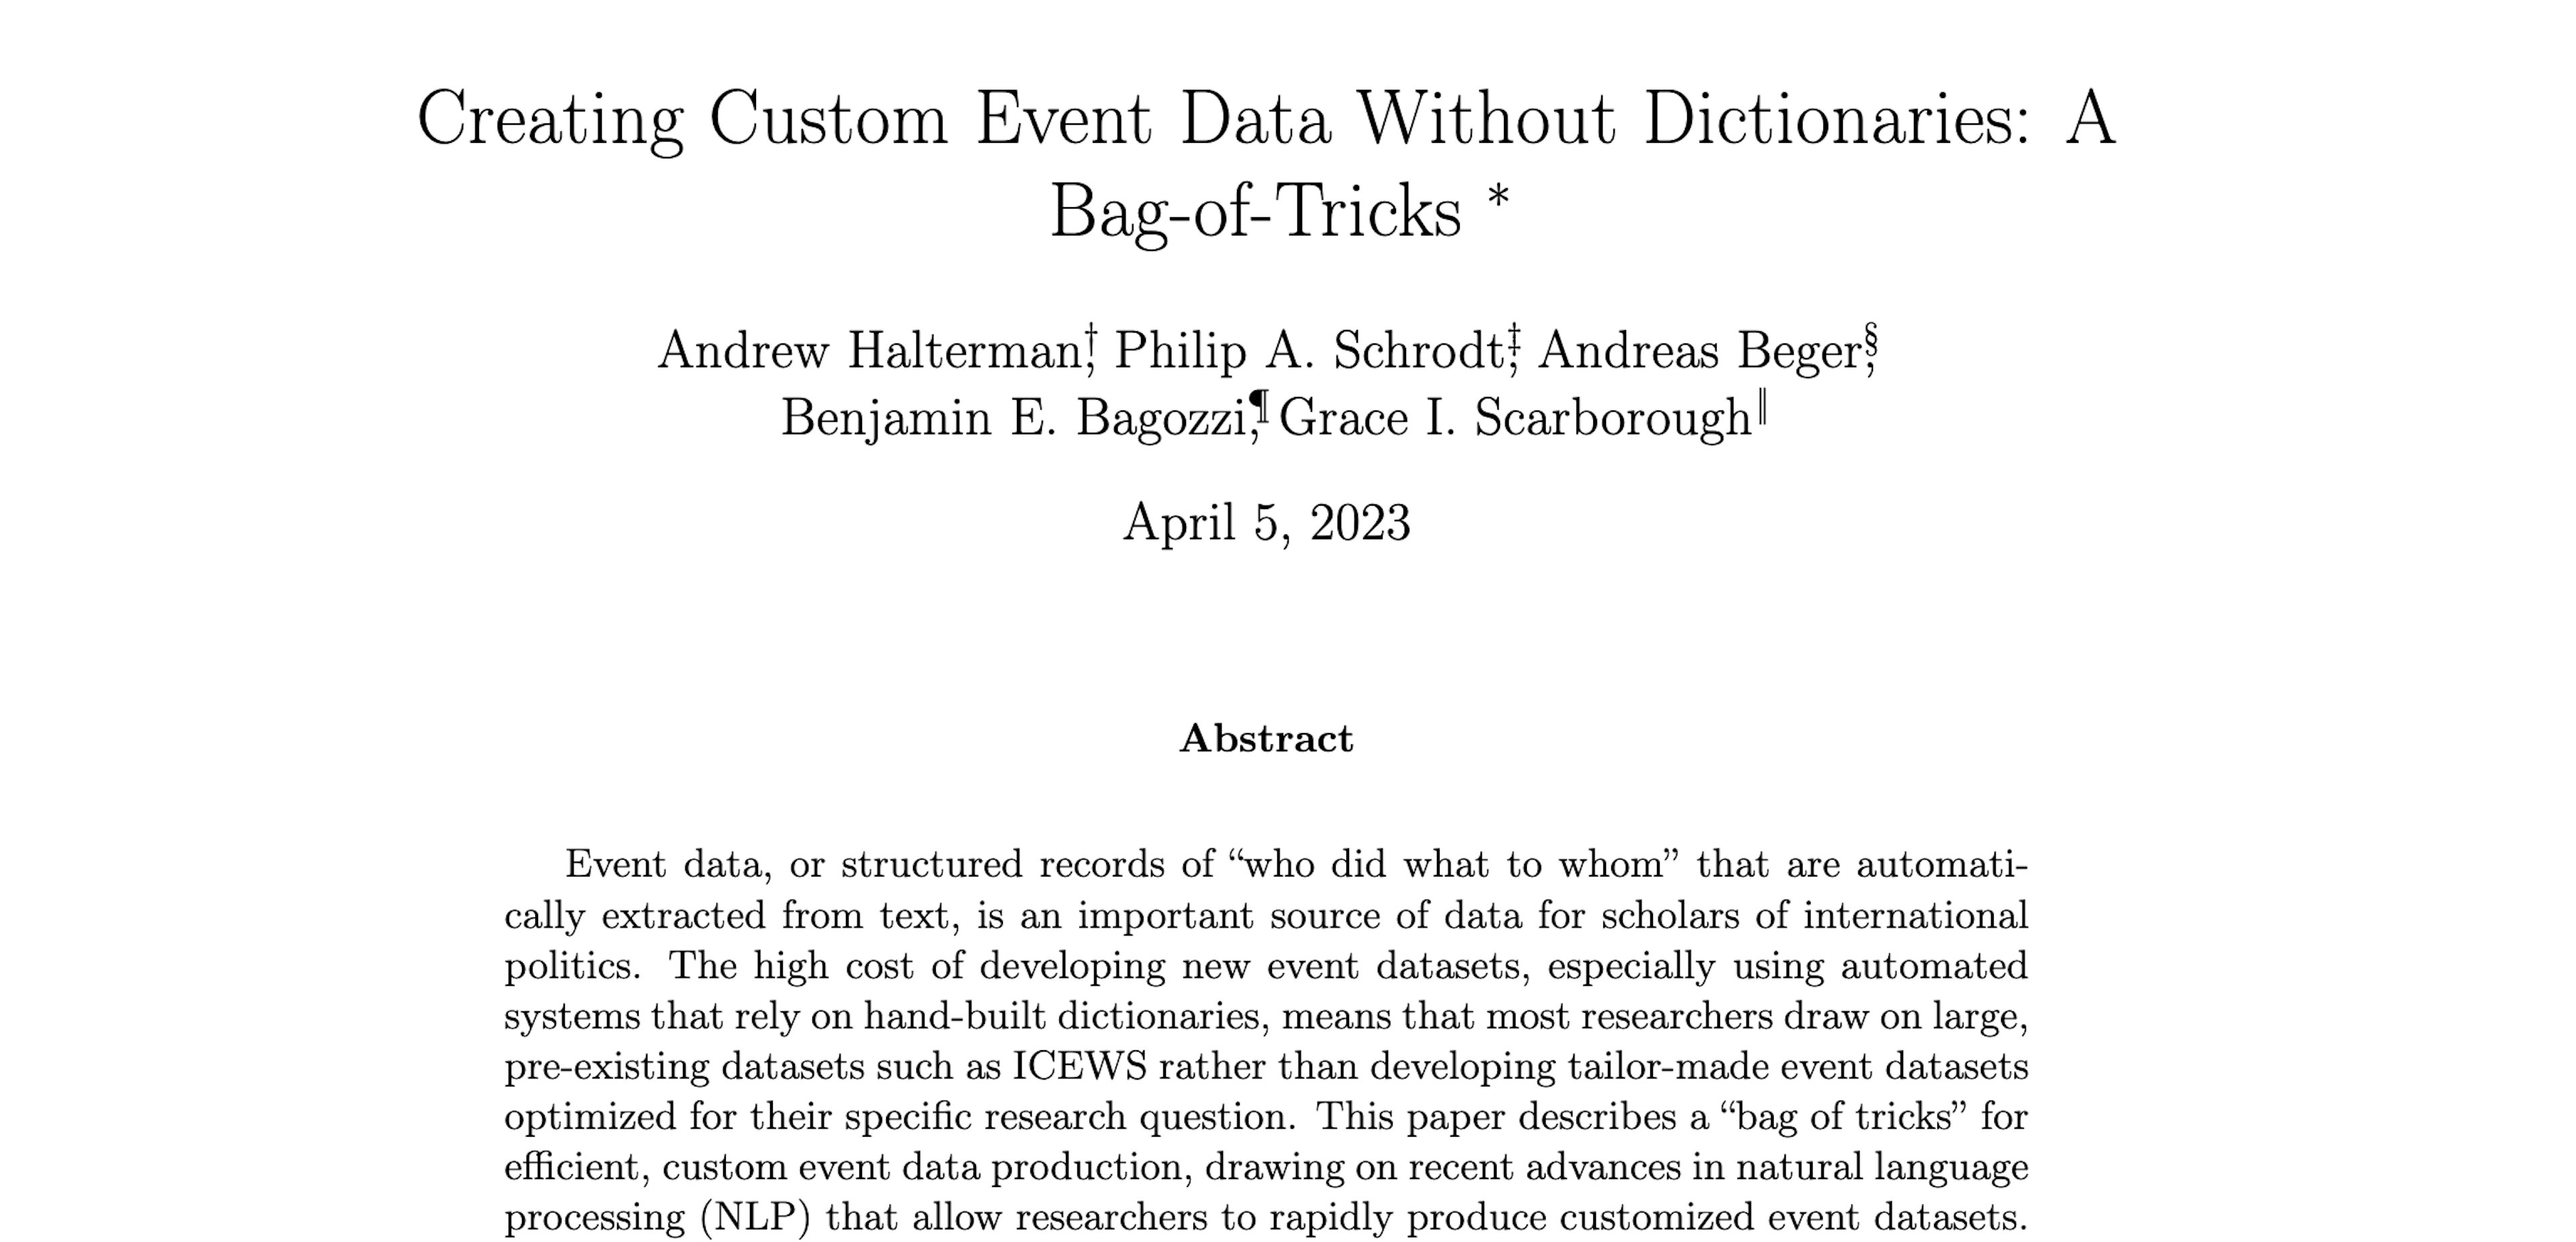 Creating Custom Event Data Without Dictionaries: A Bag-of-Tricks